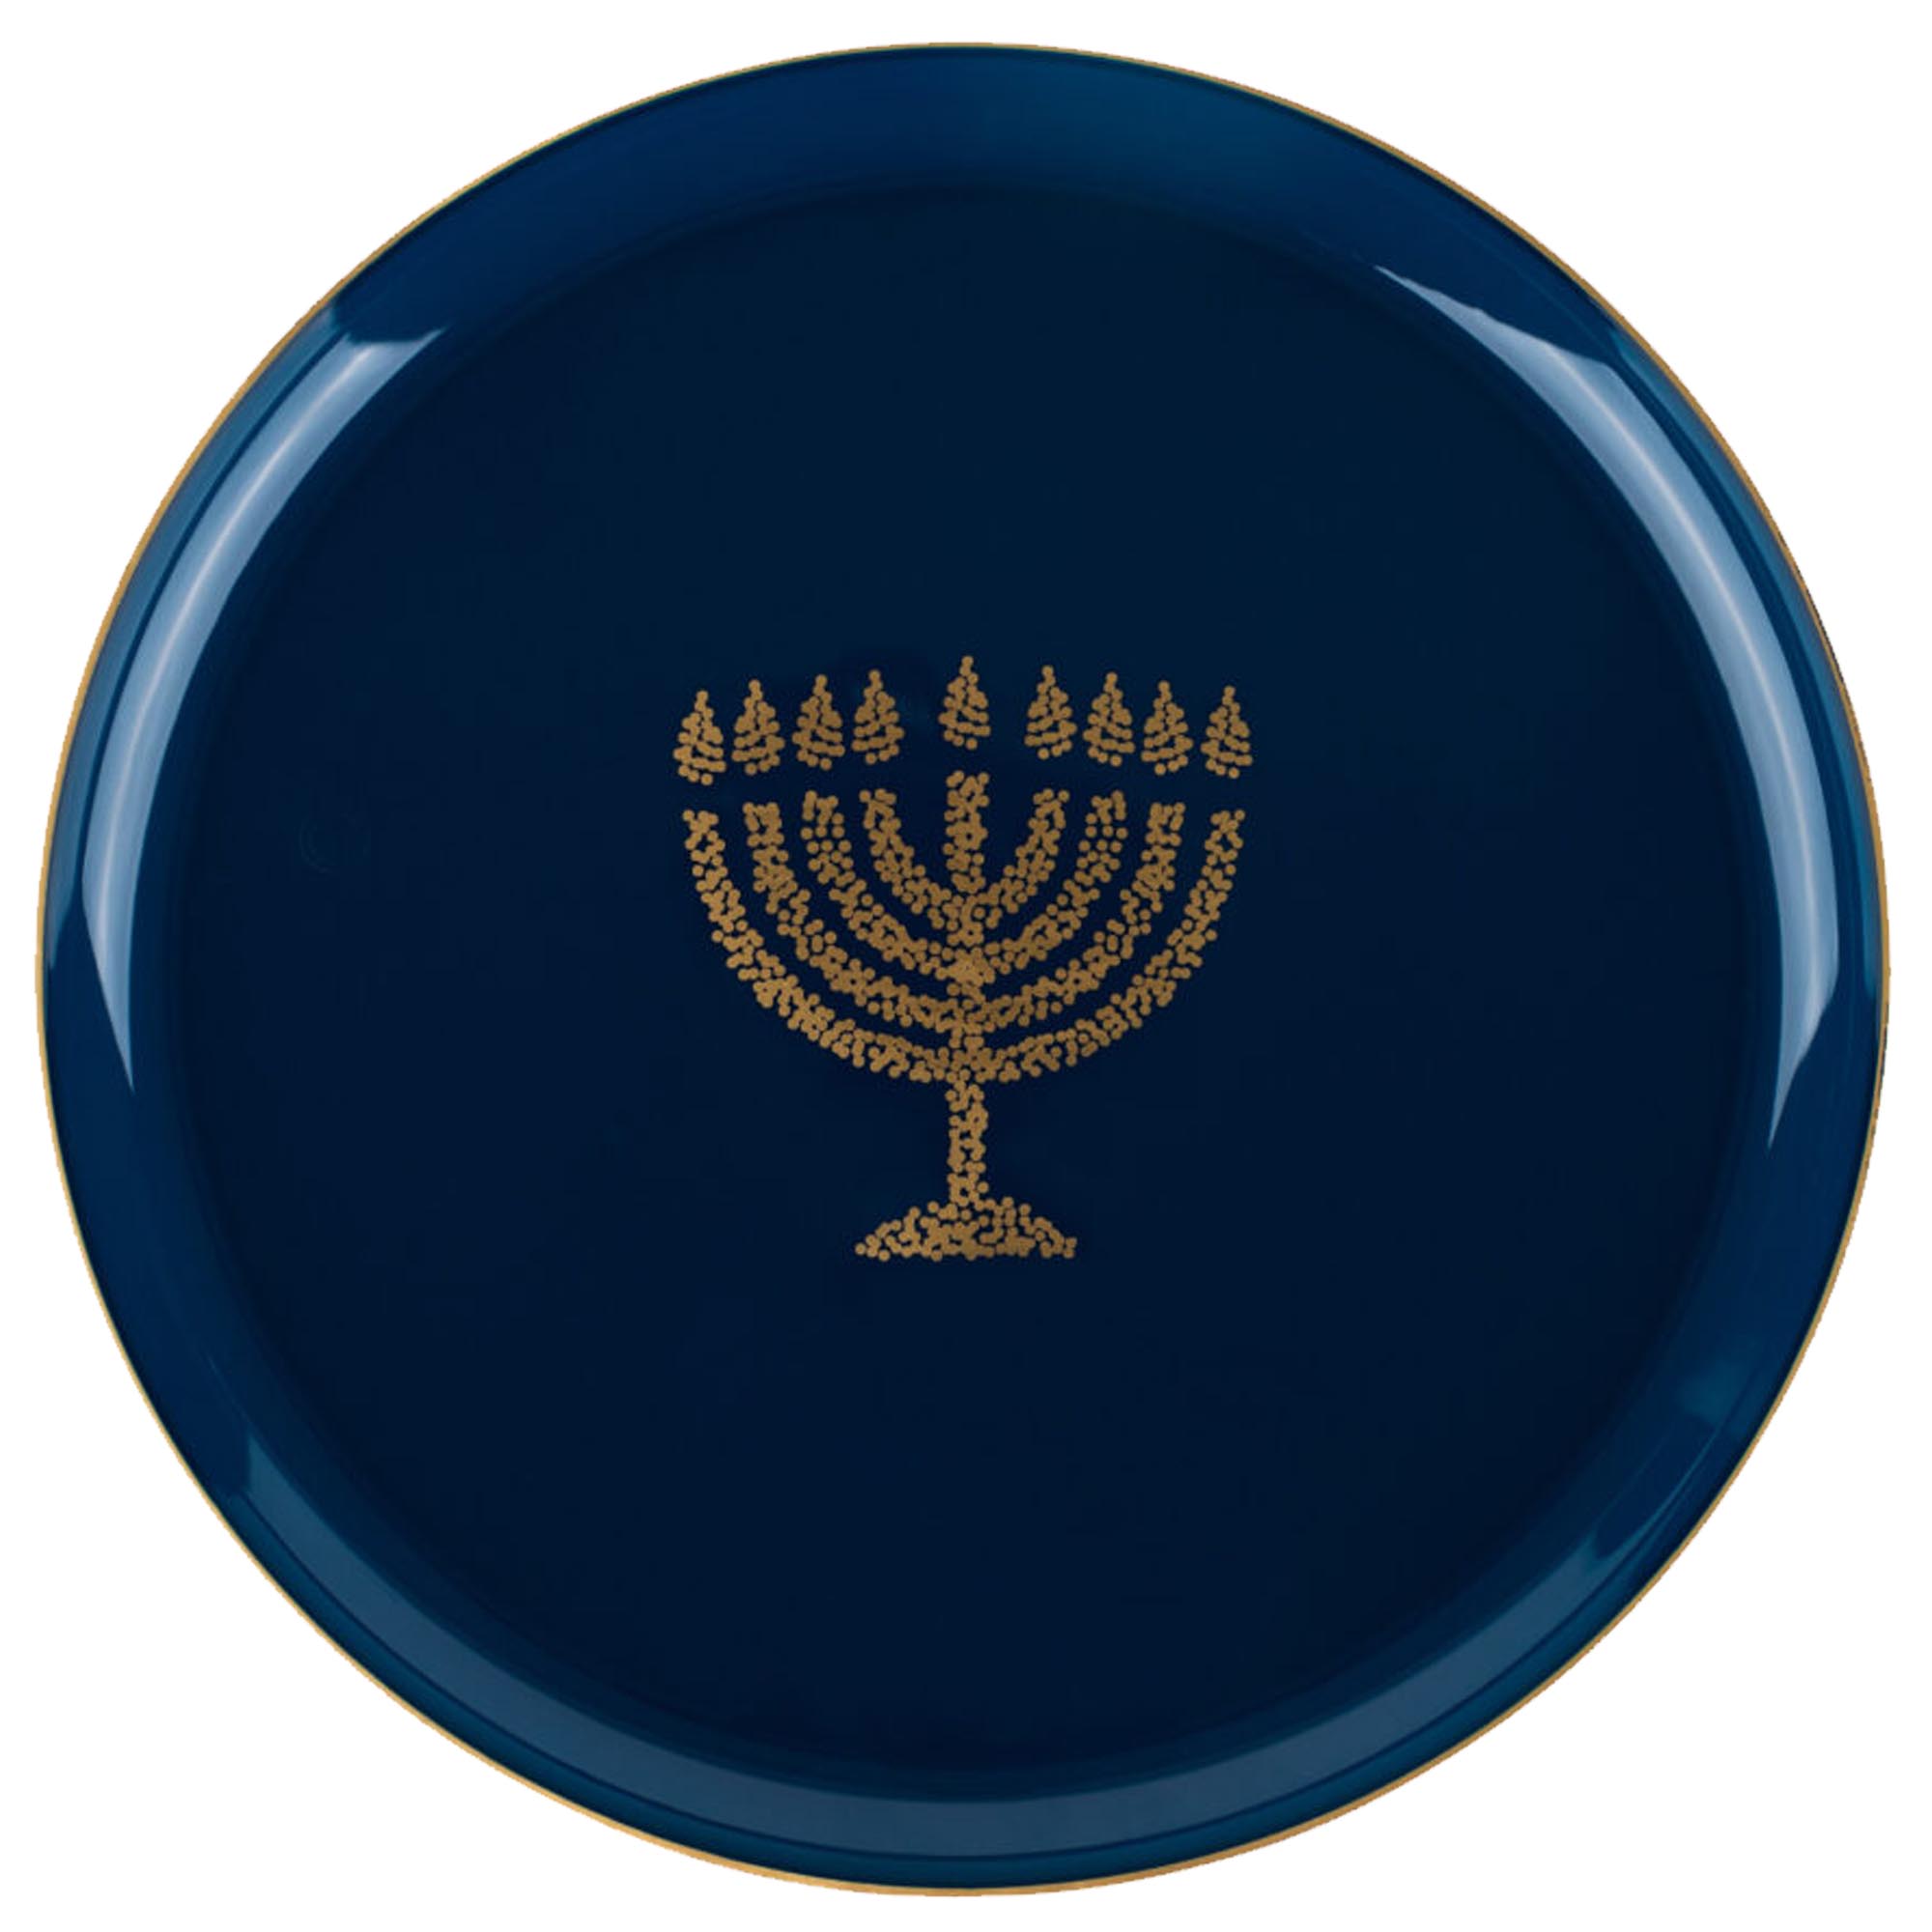 Plastic Party Plates Household Supplies Hanukkah Disposable Plastic Plates Chanukah Plates Chanukah Bbq plates 10 inches fancy disposable plates heavy duty plates classic elegant sturdy plates reusable wedding dinner plates catering high quality birthday anniversary plating 10.6 inches